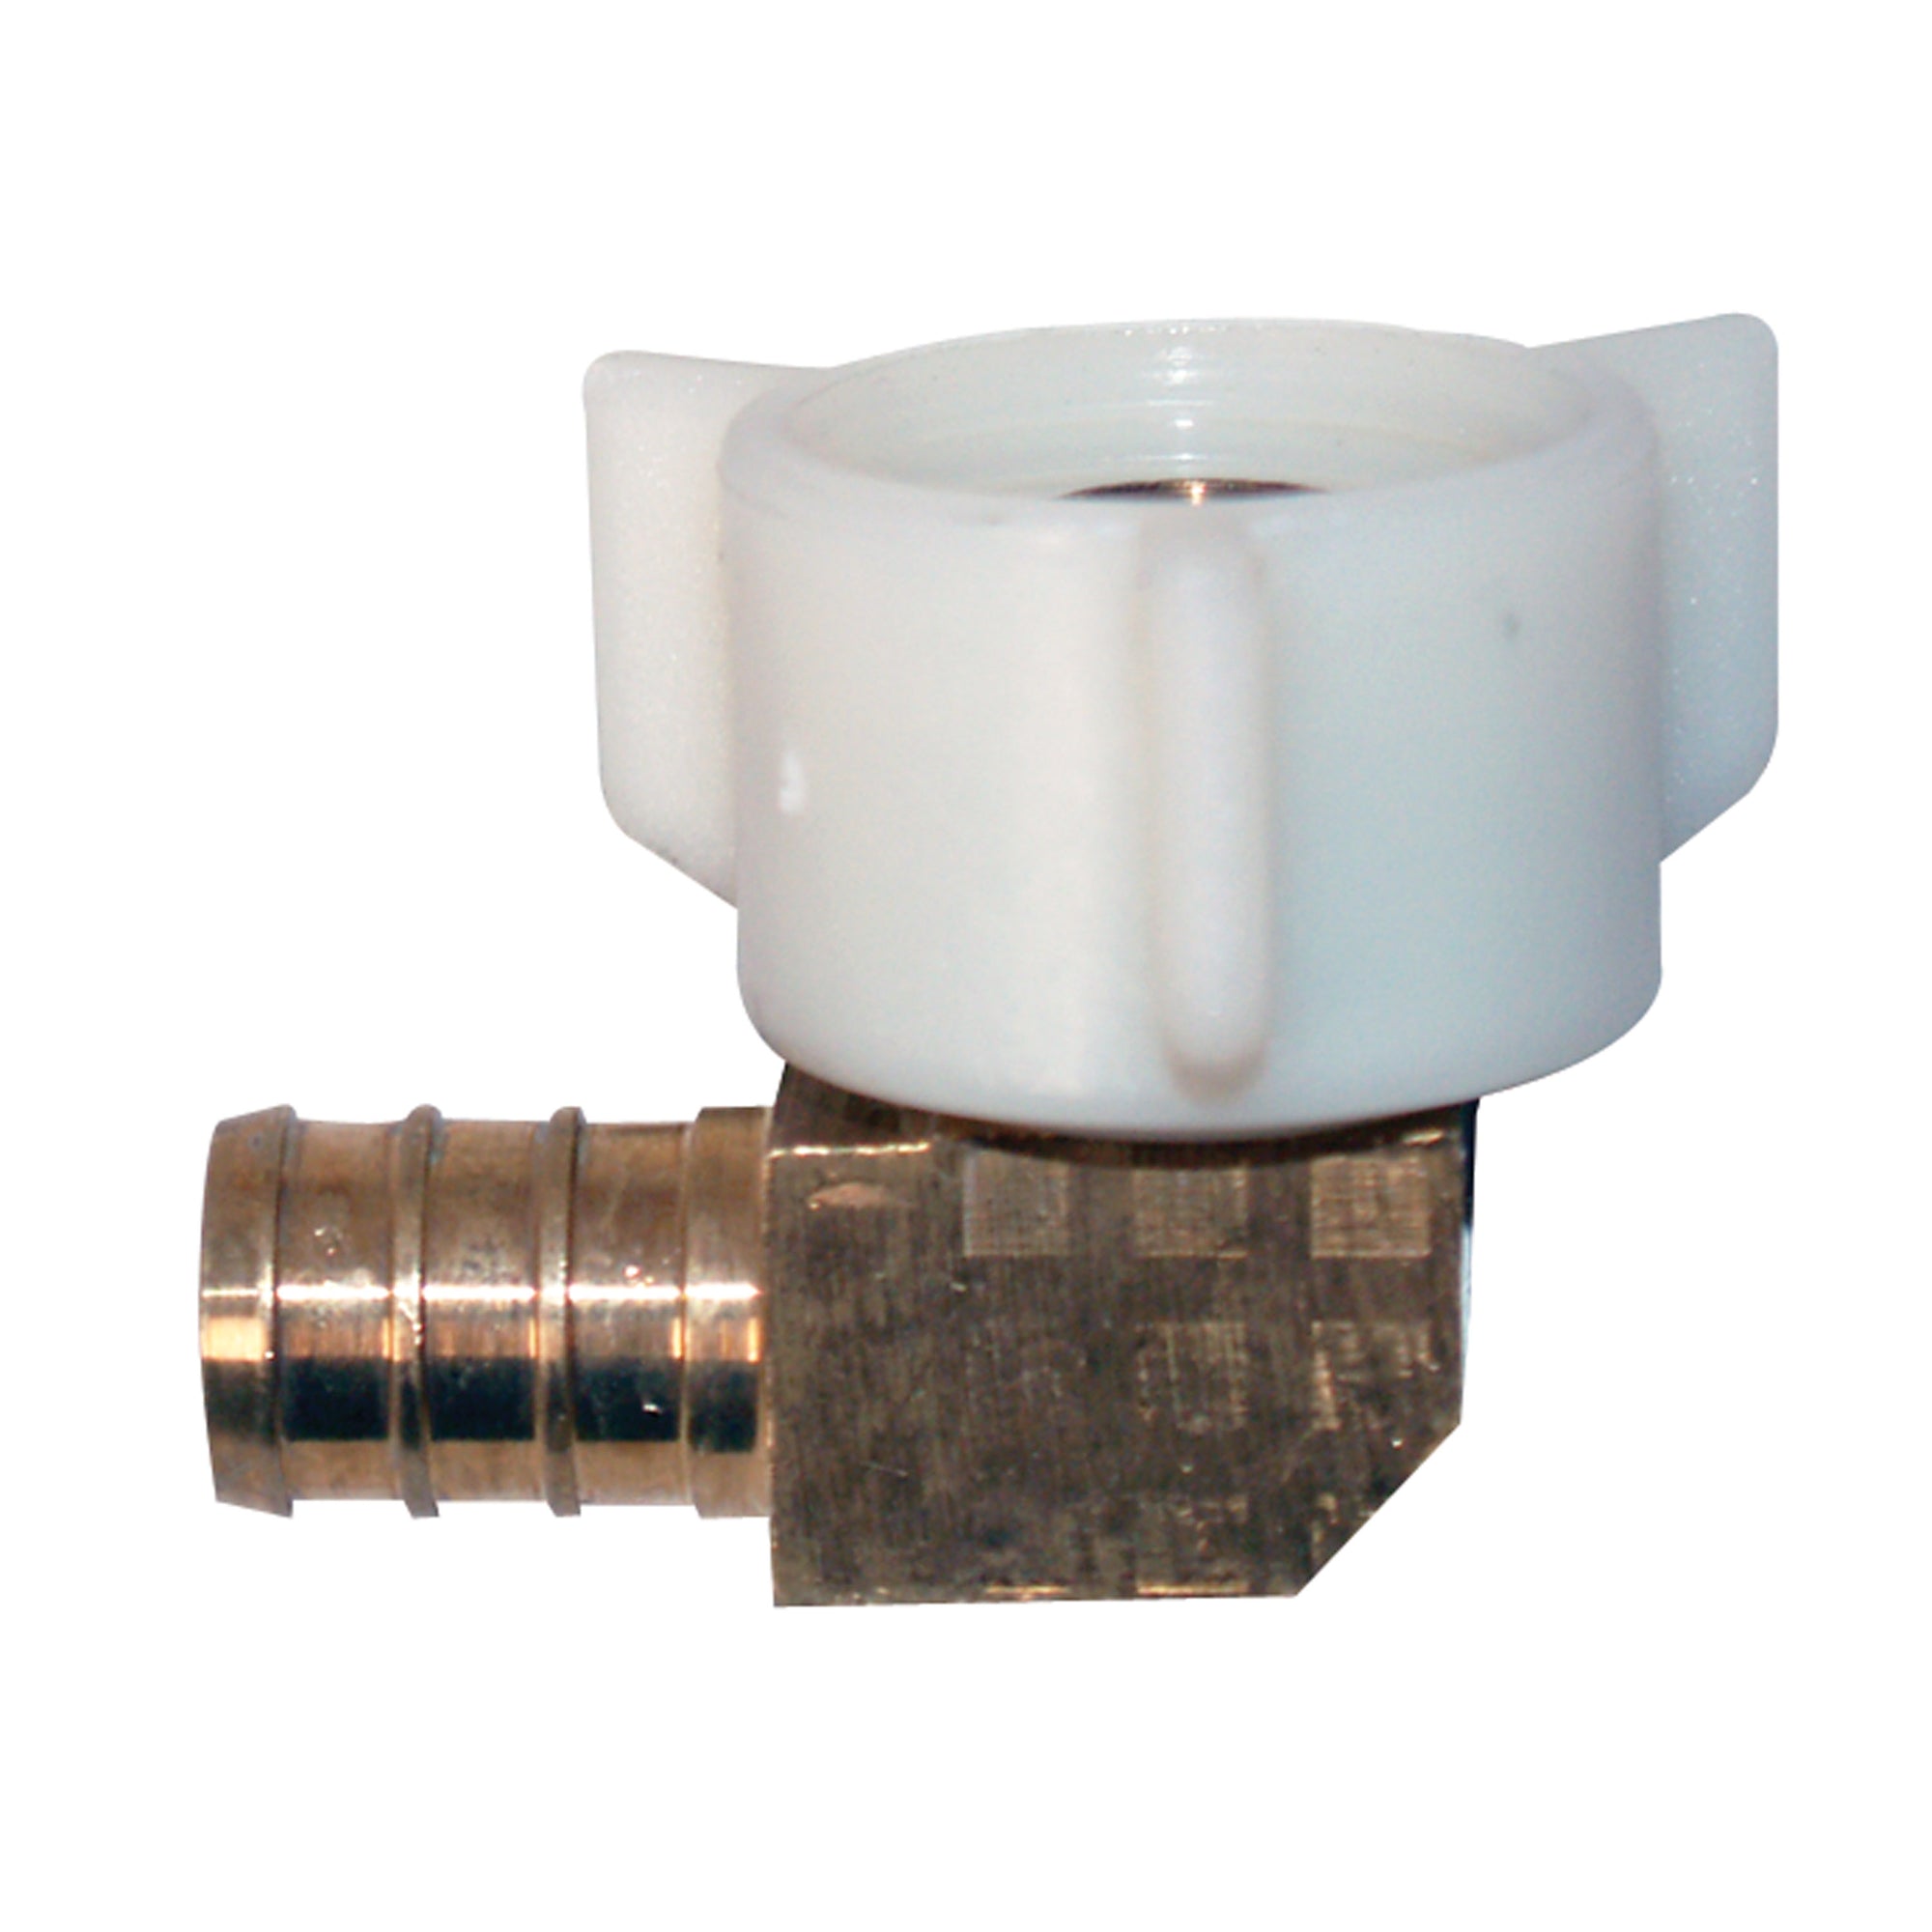 Flair-It 51198 Brass Swivel Elbow - 1/2" Barb x 1/2" FPT Cone Connector